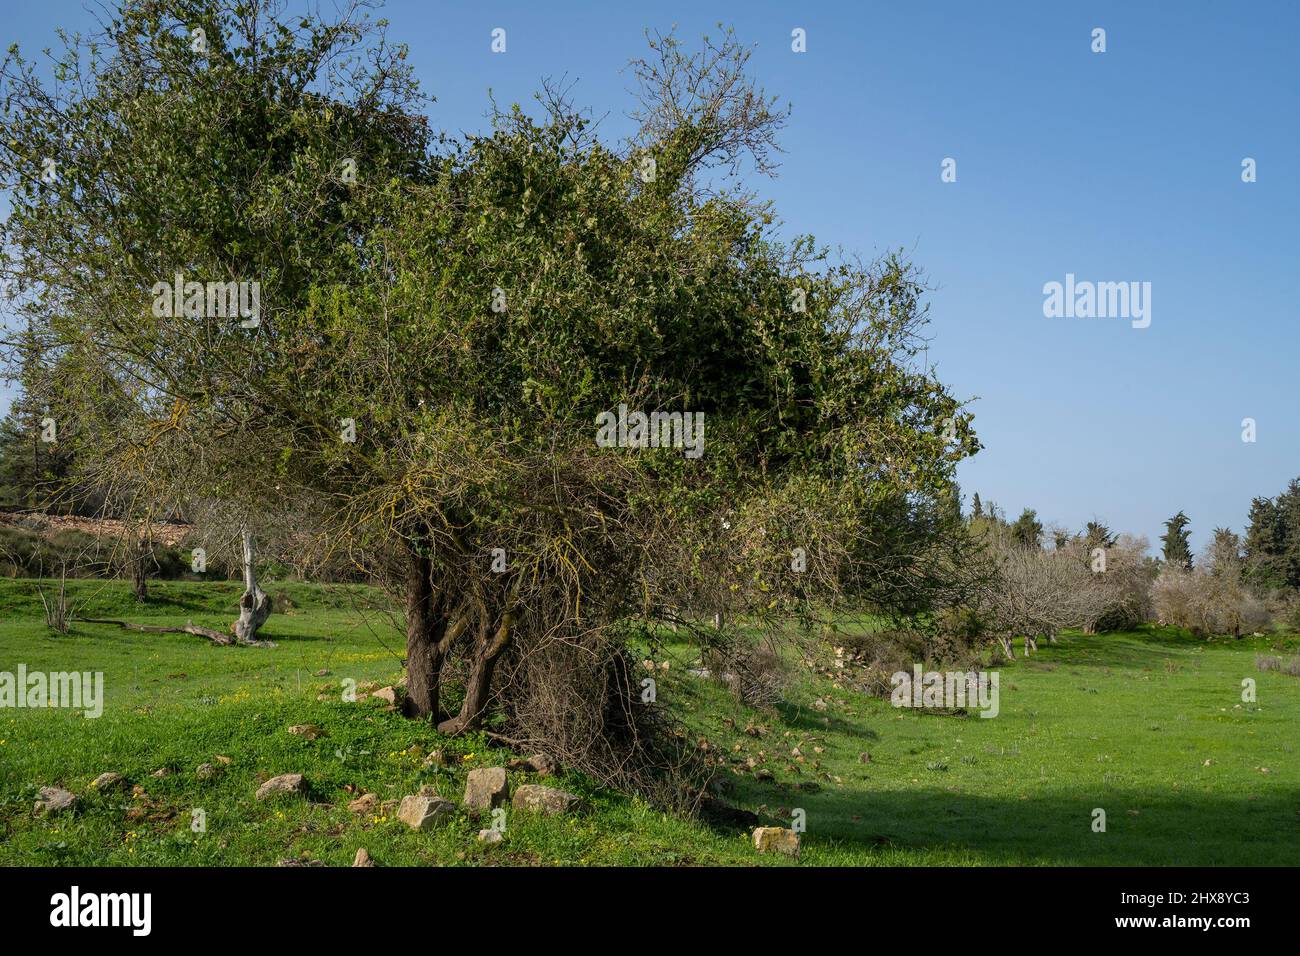 An old almond tree, covered by a climbing plant in an israeli fallow field in the Judea mountains near Jerusalem, Israel. Stock Photo